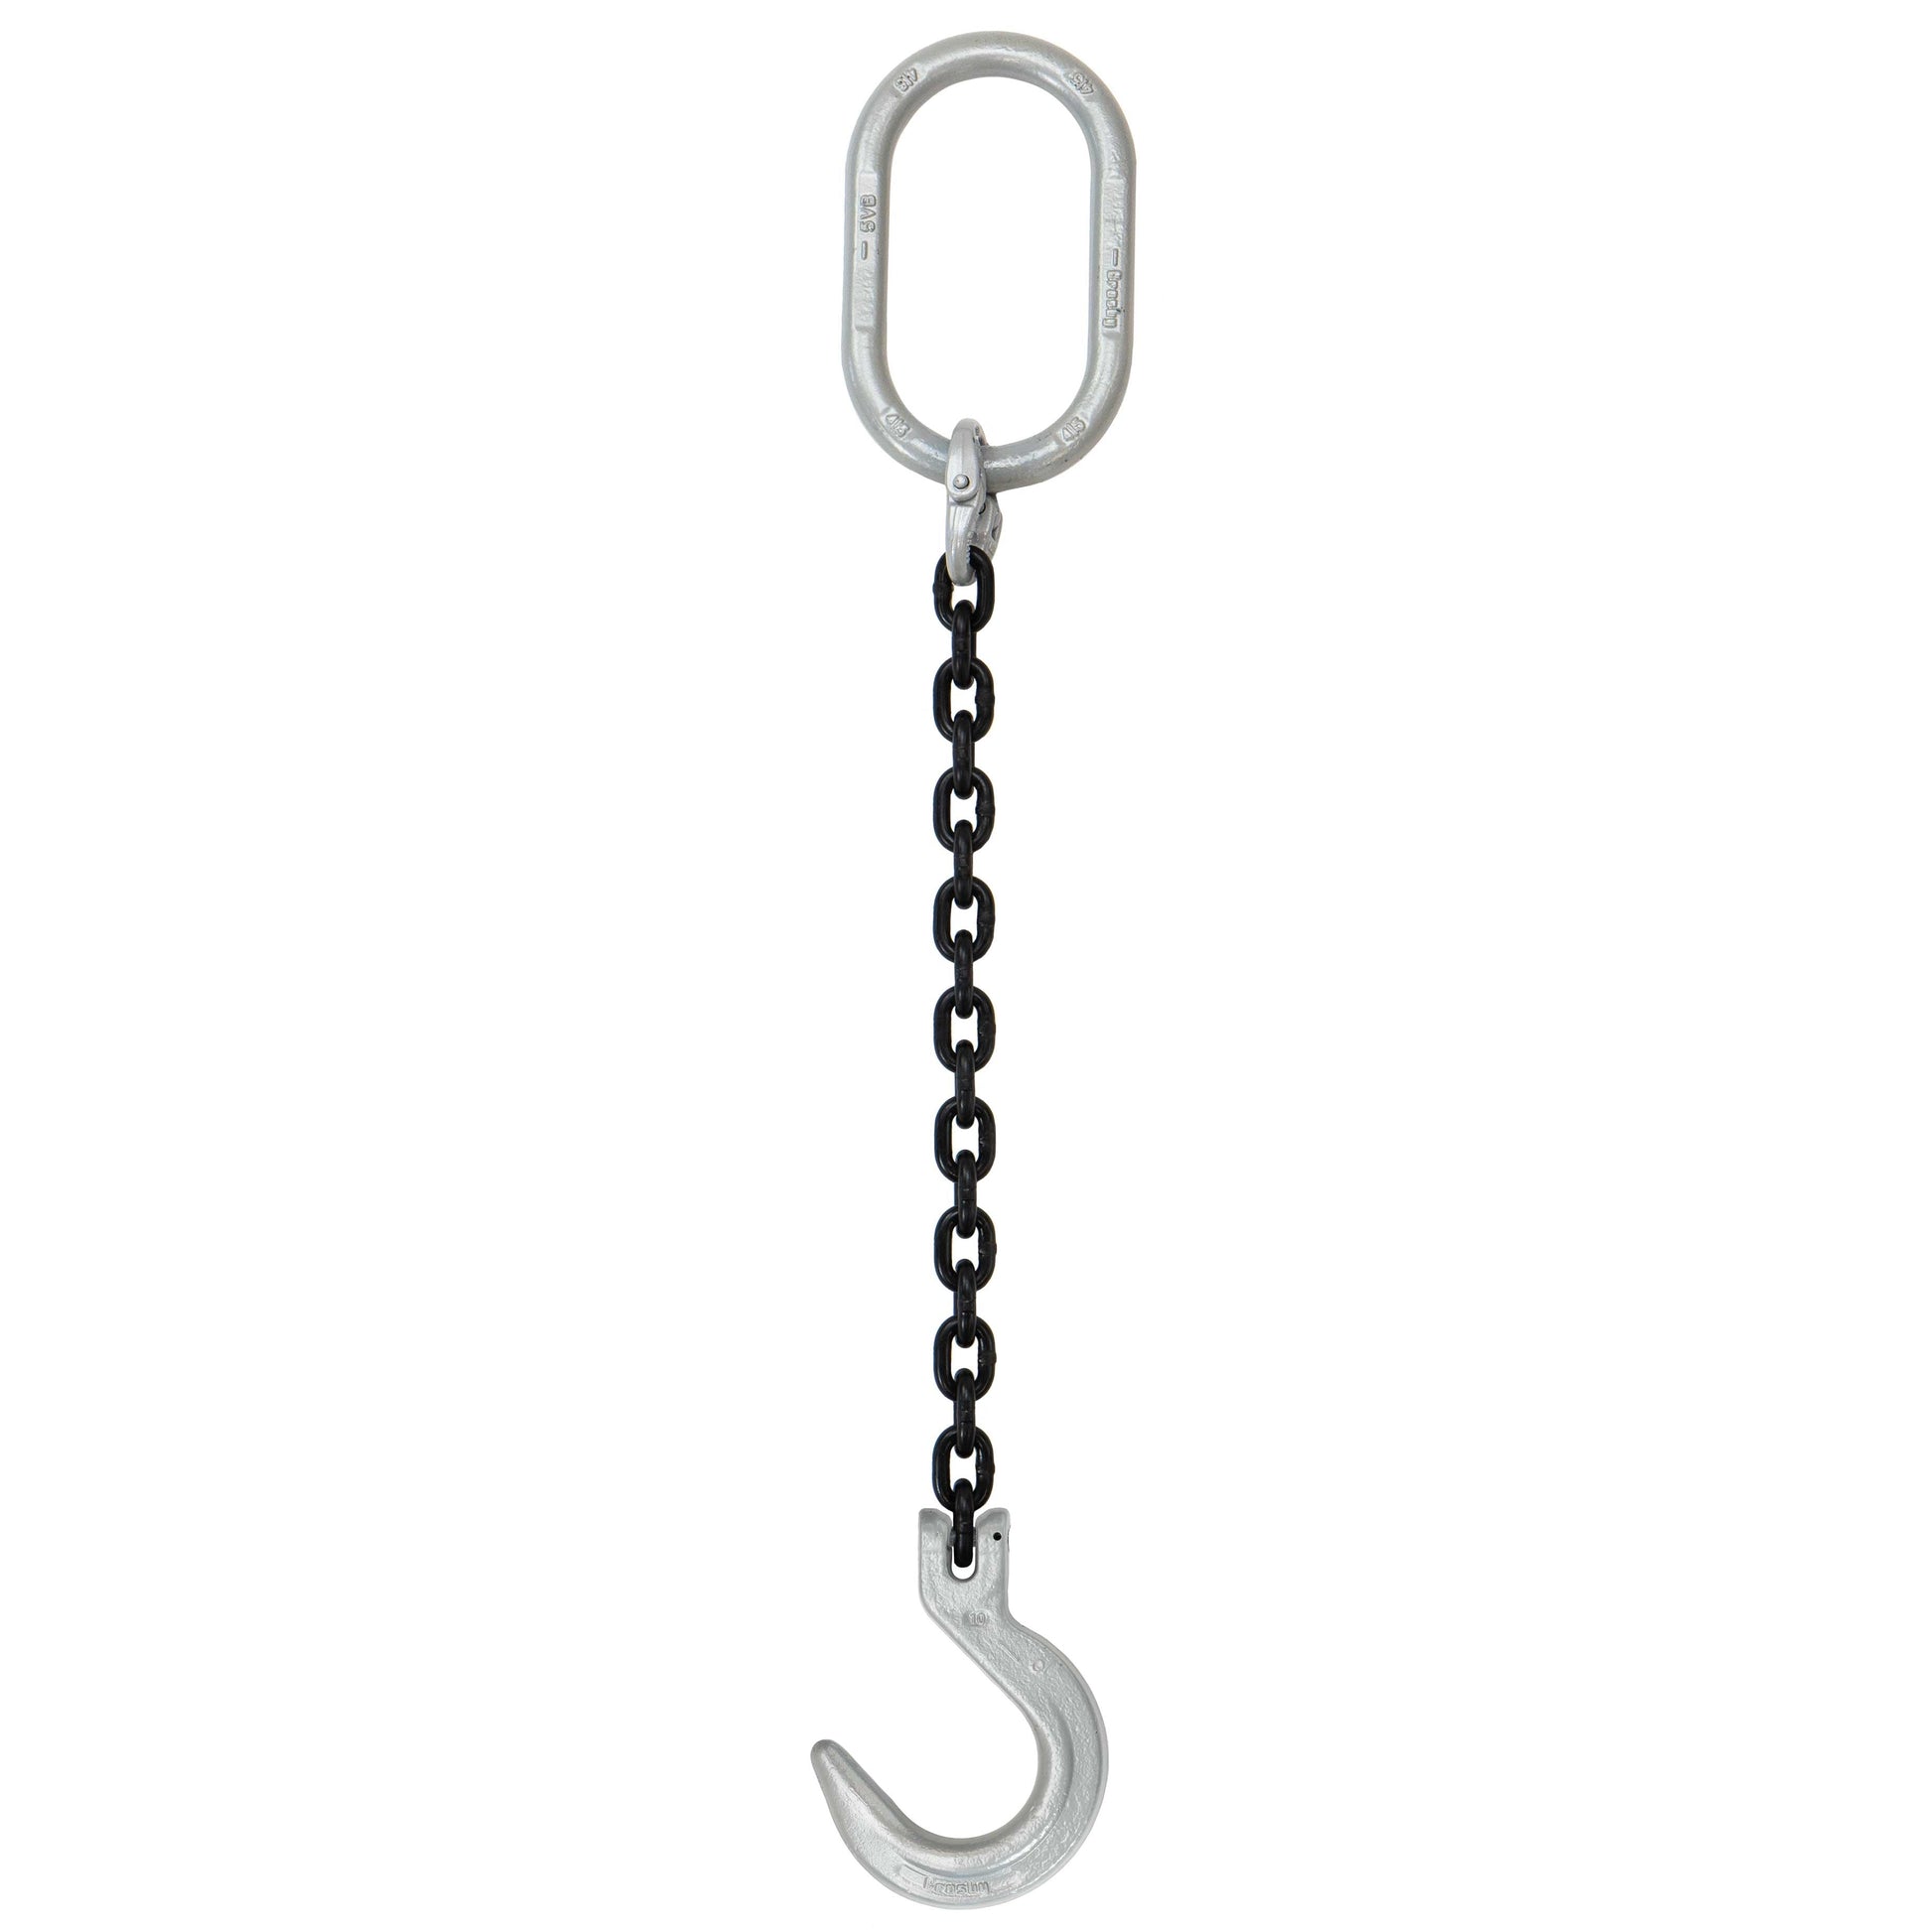 38 inch x 16 foot Domestic Single Leg Chain Sling w Crosby Foundry Hook Grade 100 image 1 of 2